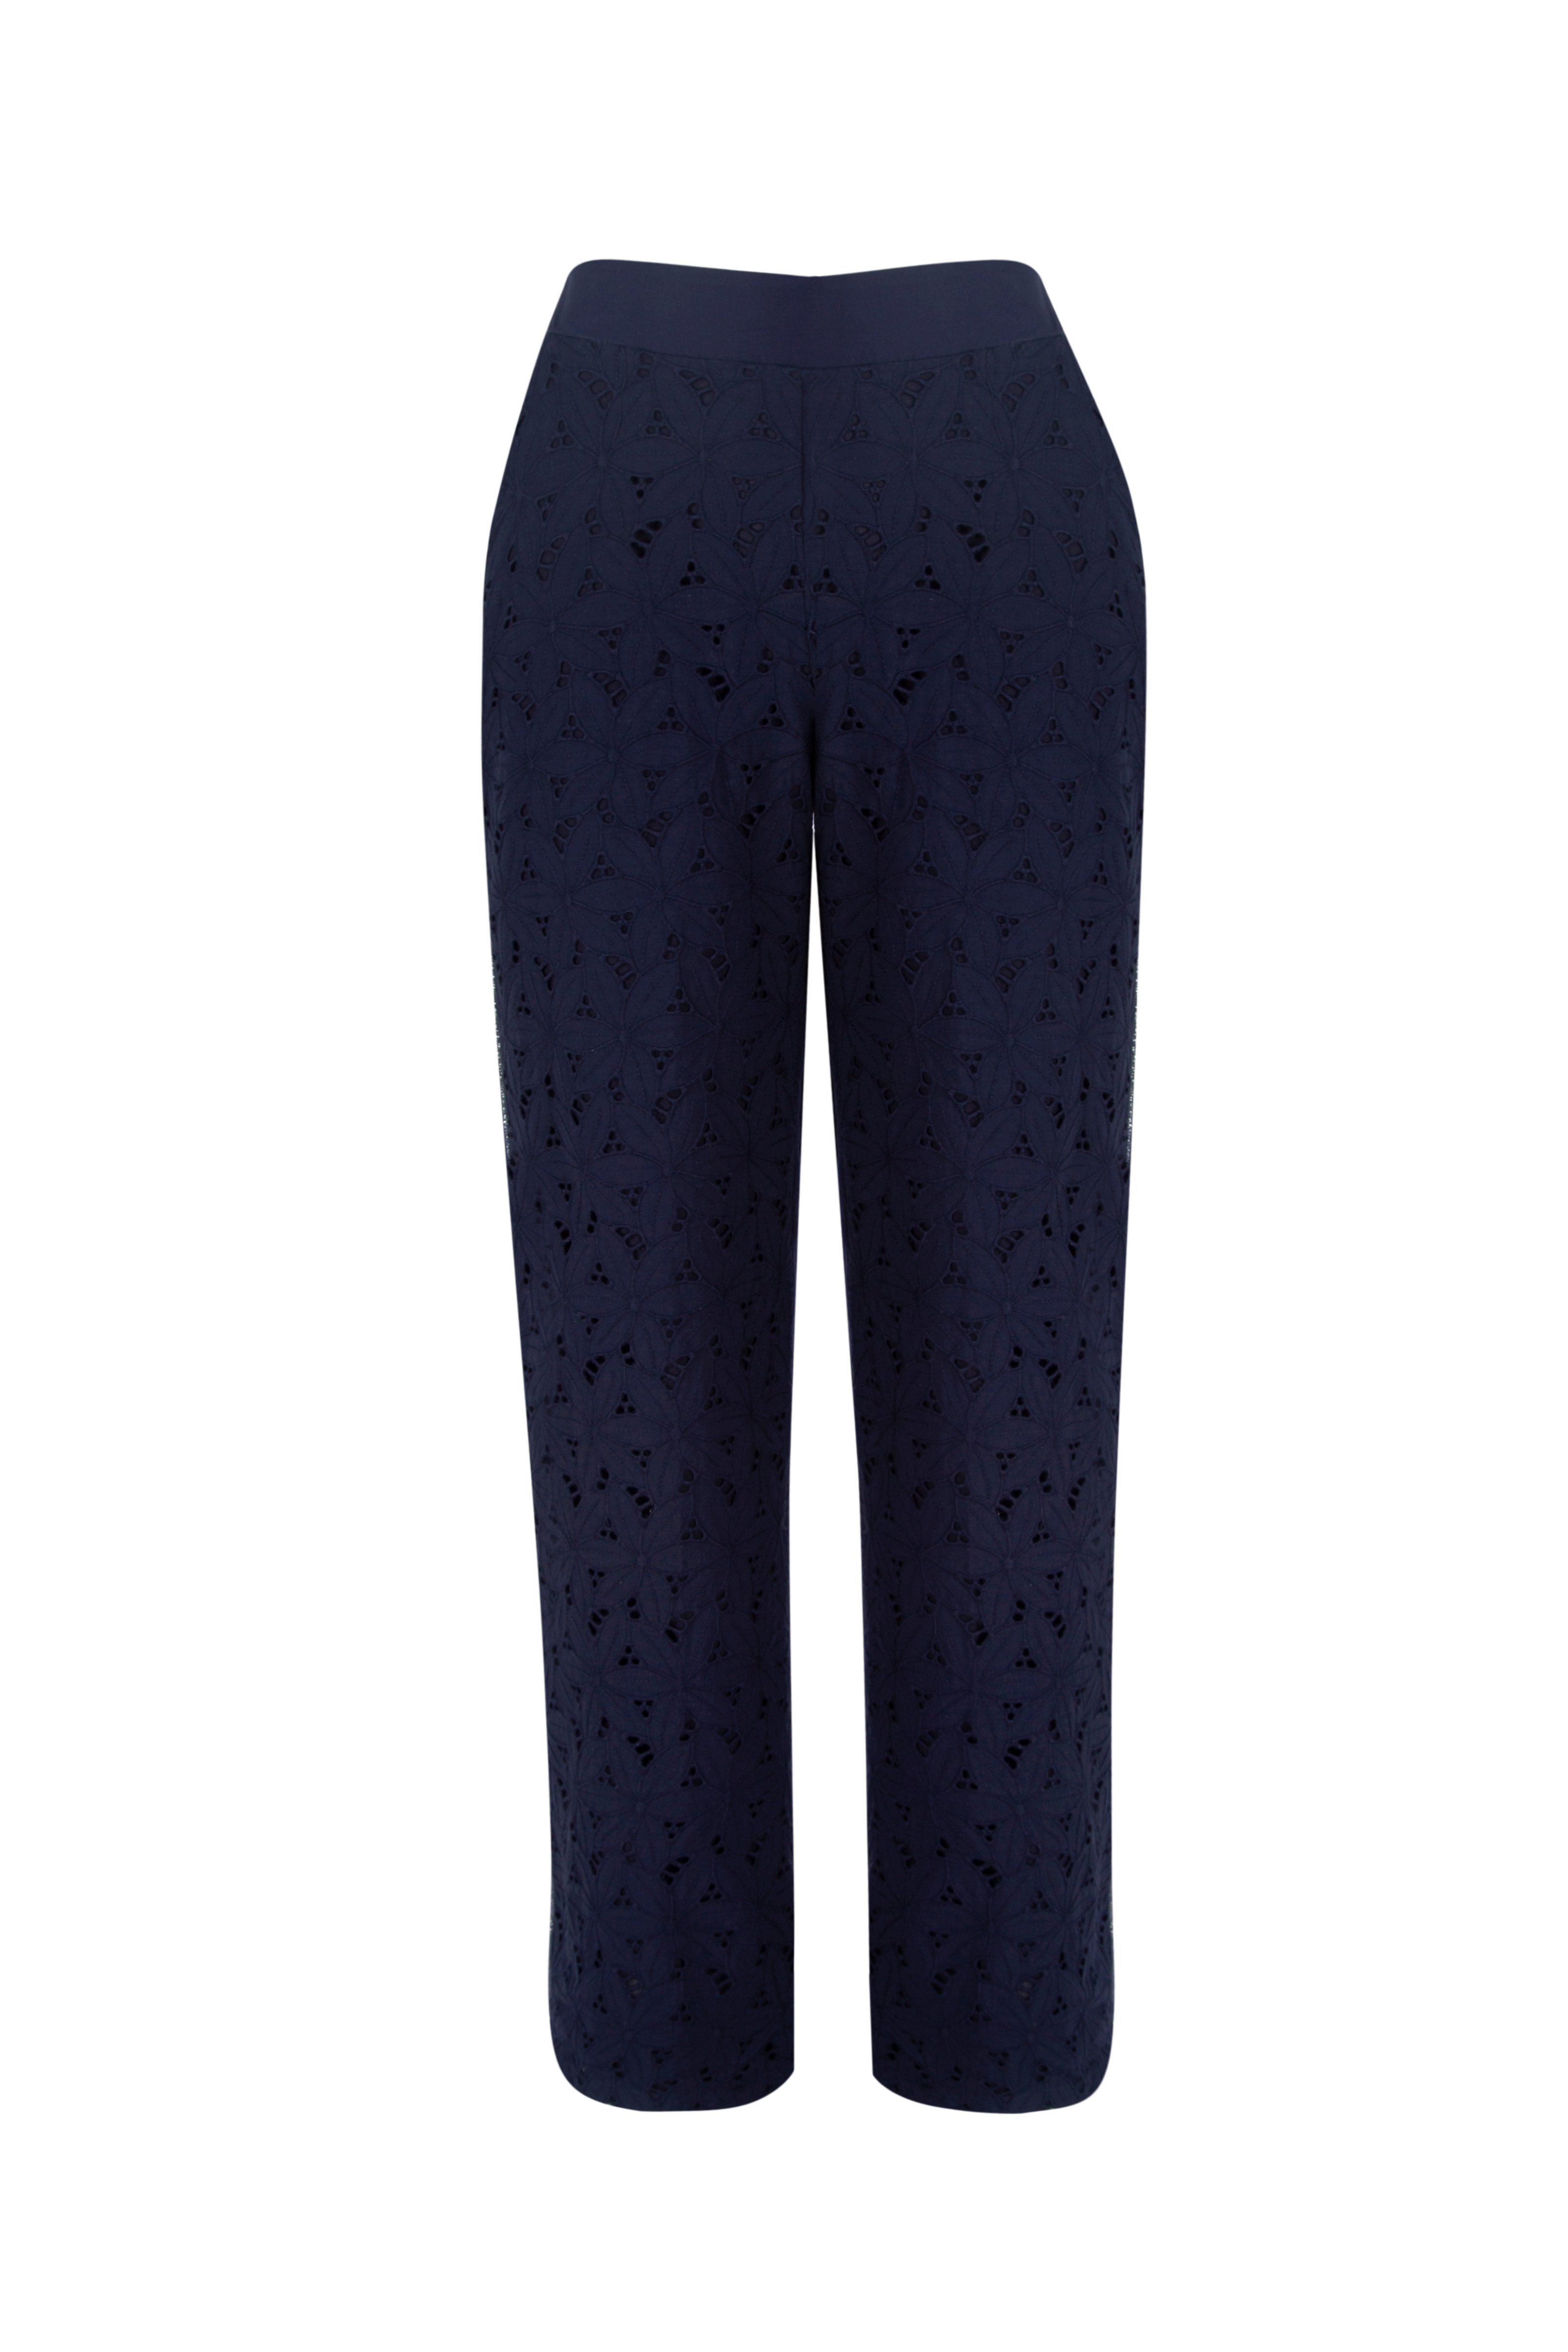 Loose Cut Organic Cotton Navy Blue Embroidery Trousers